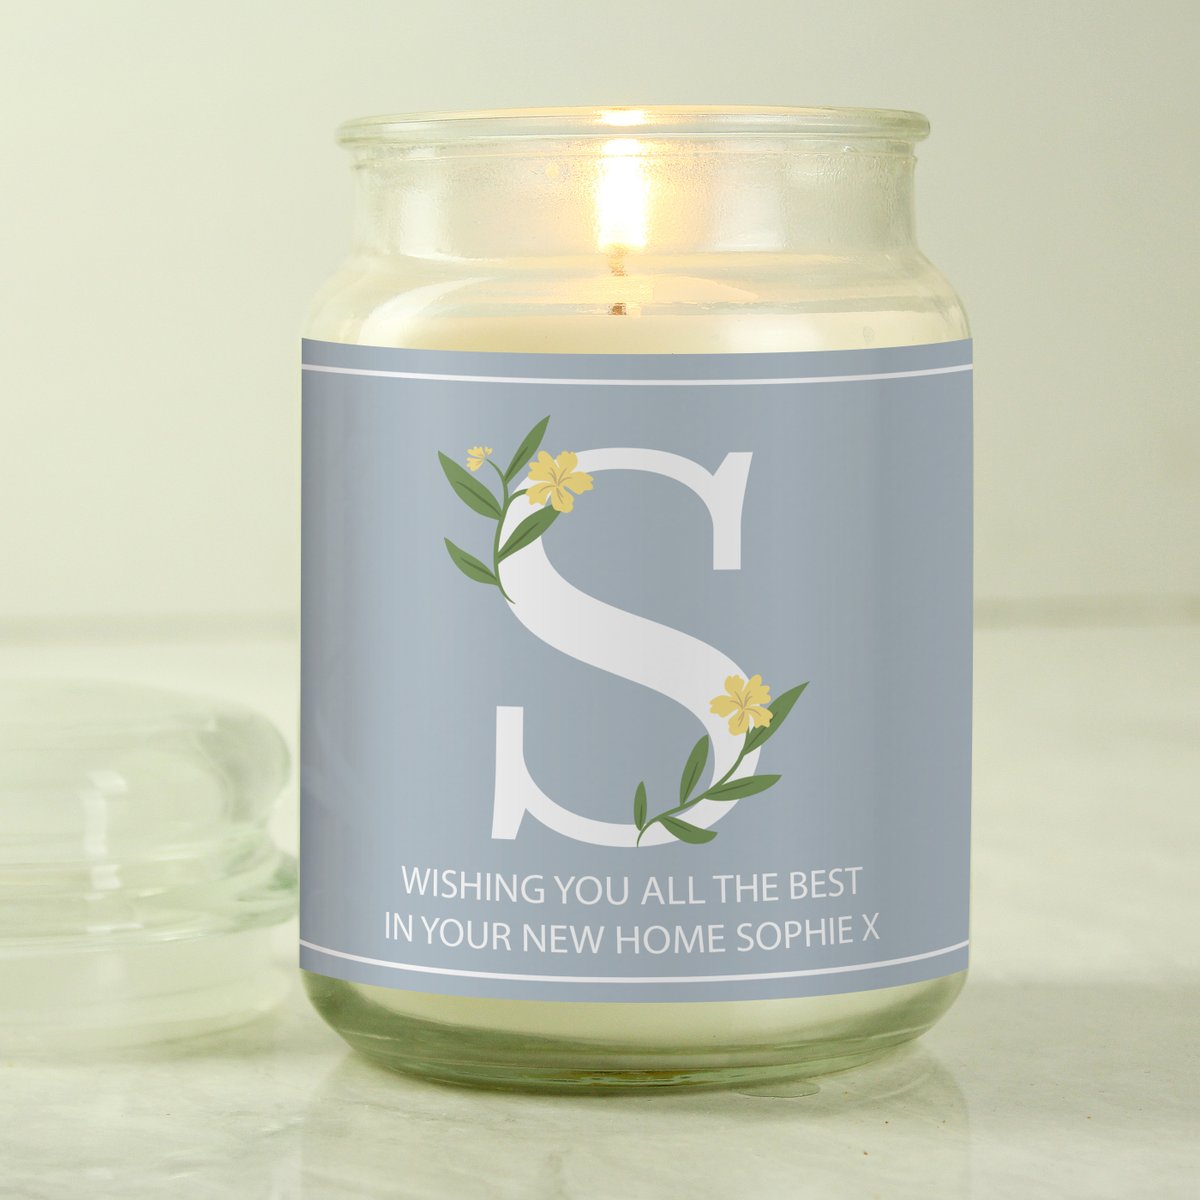 Scented with French vanilla, this large jar candle has a label that can feature any initial & your own message lilybluestore.com/products/perso…

#candles #scentedcandle #giftideas #shopindie #mhhsbd #EarlyBiz  #EarlyBiz